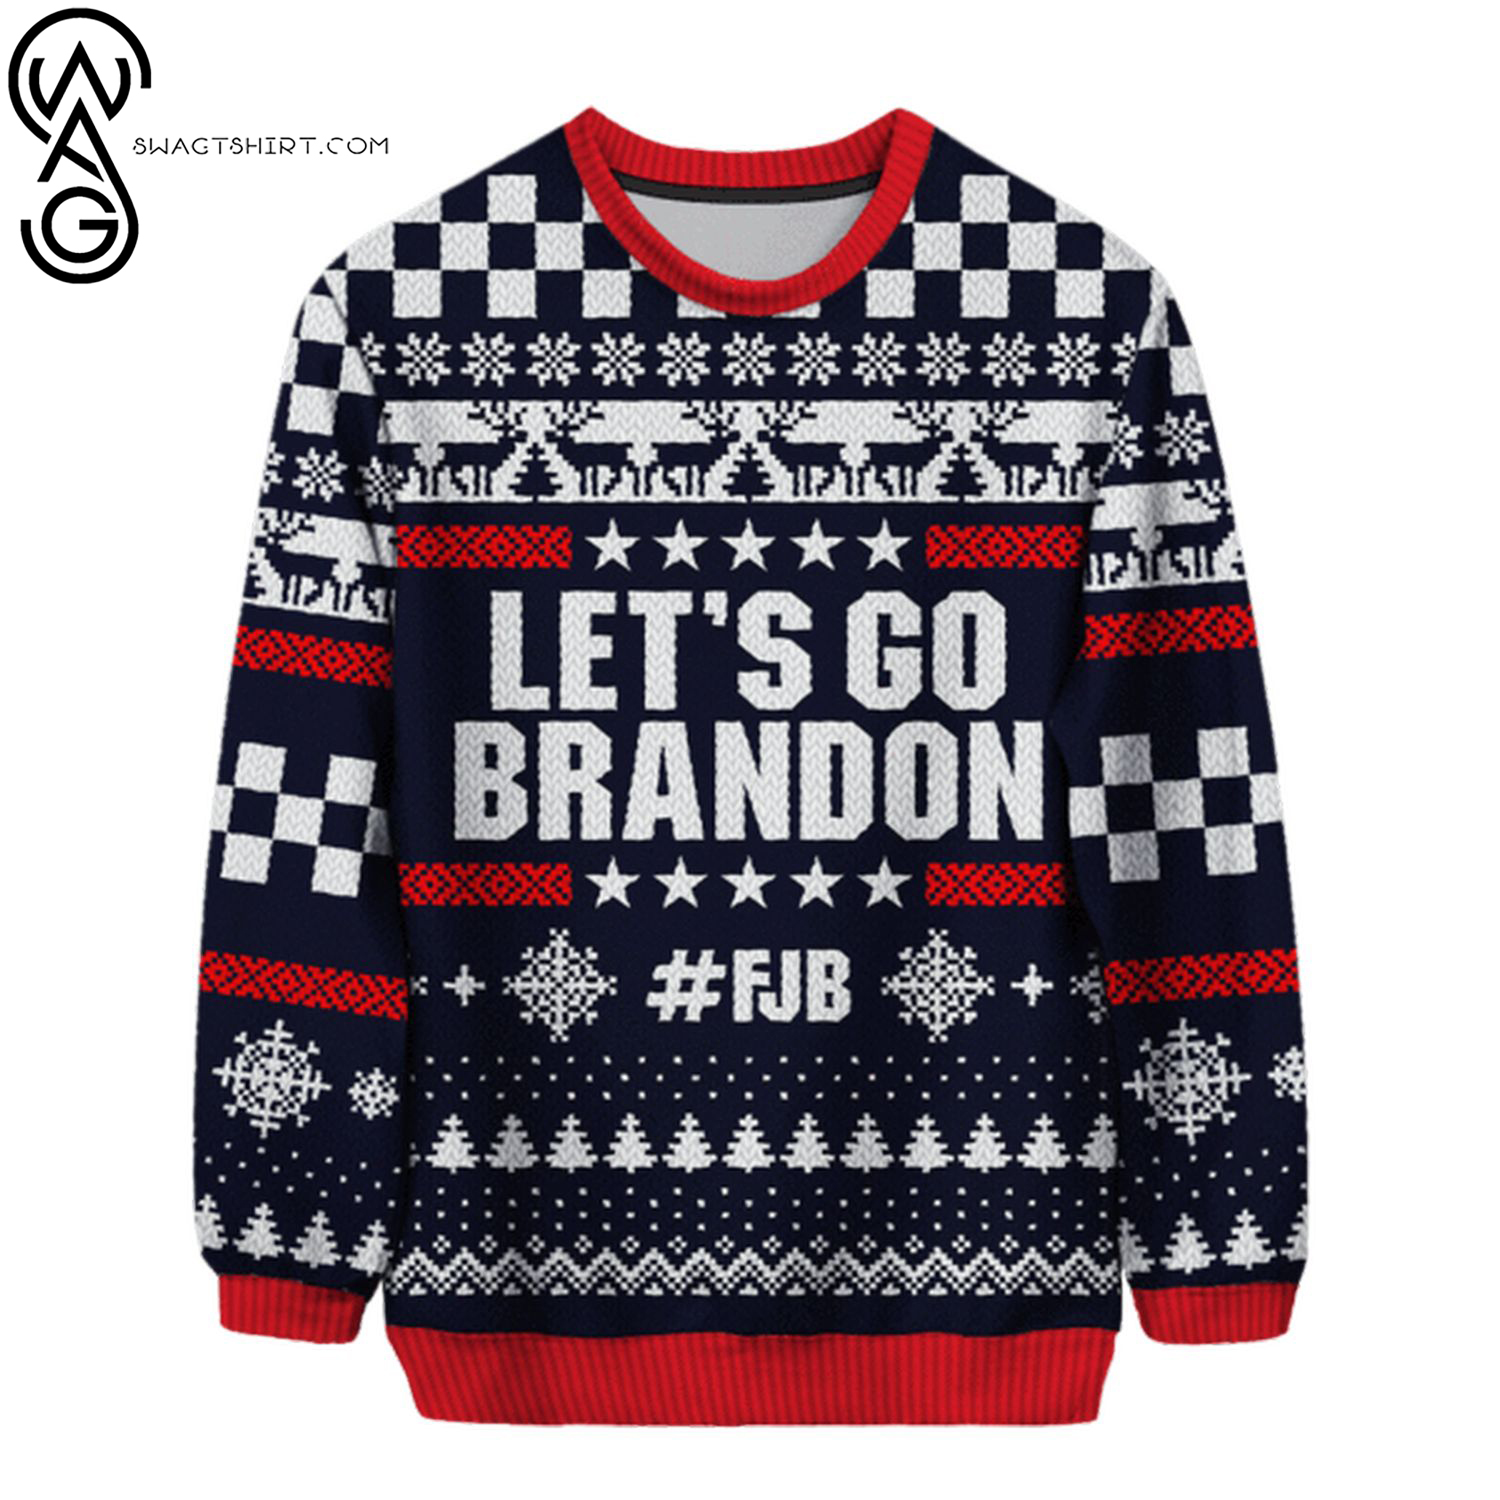 Let's go brandon american impeach 46 ugly christmas sweater